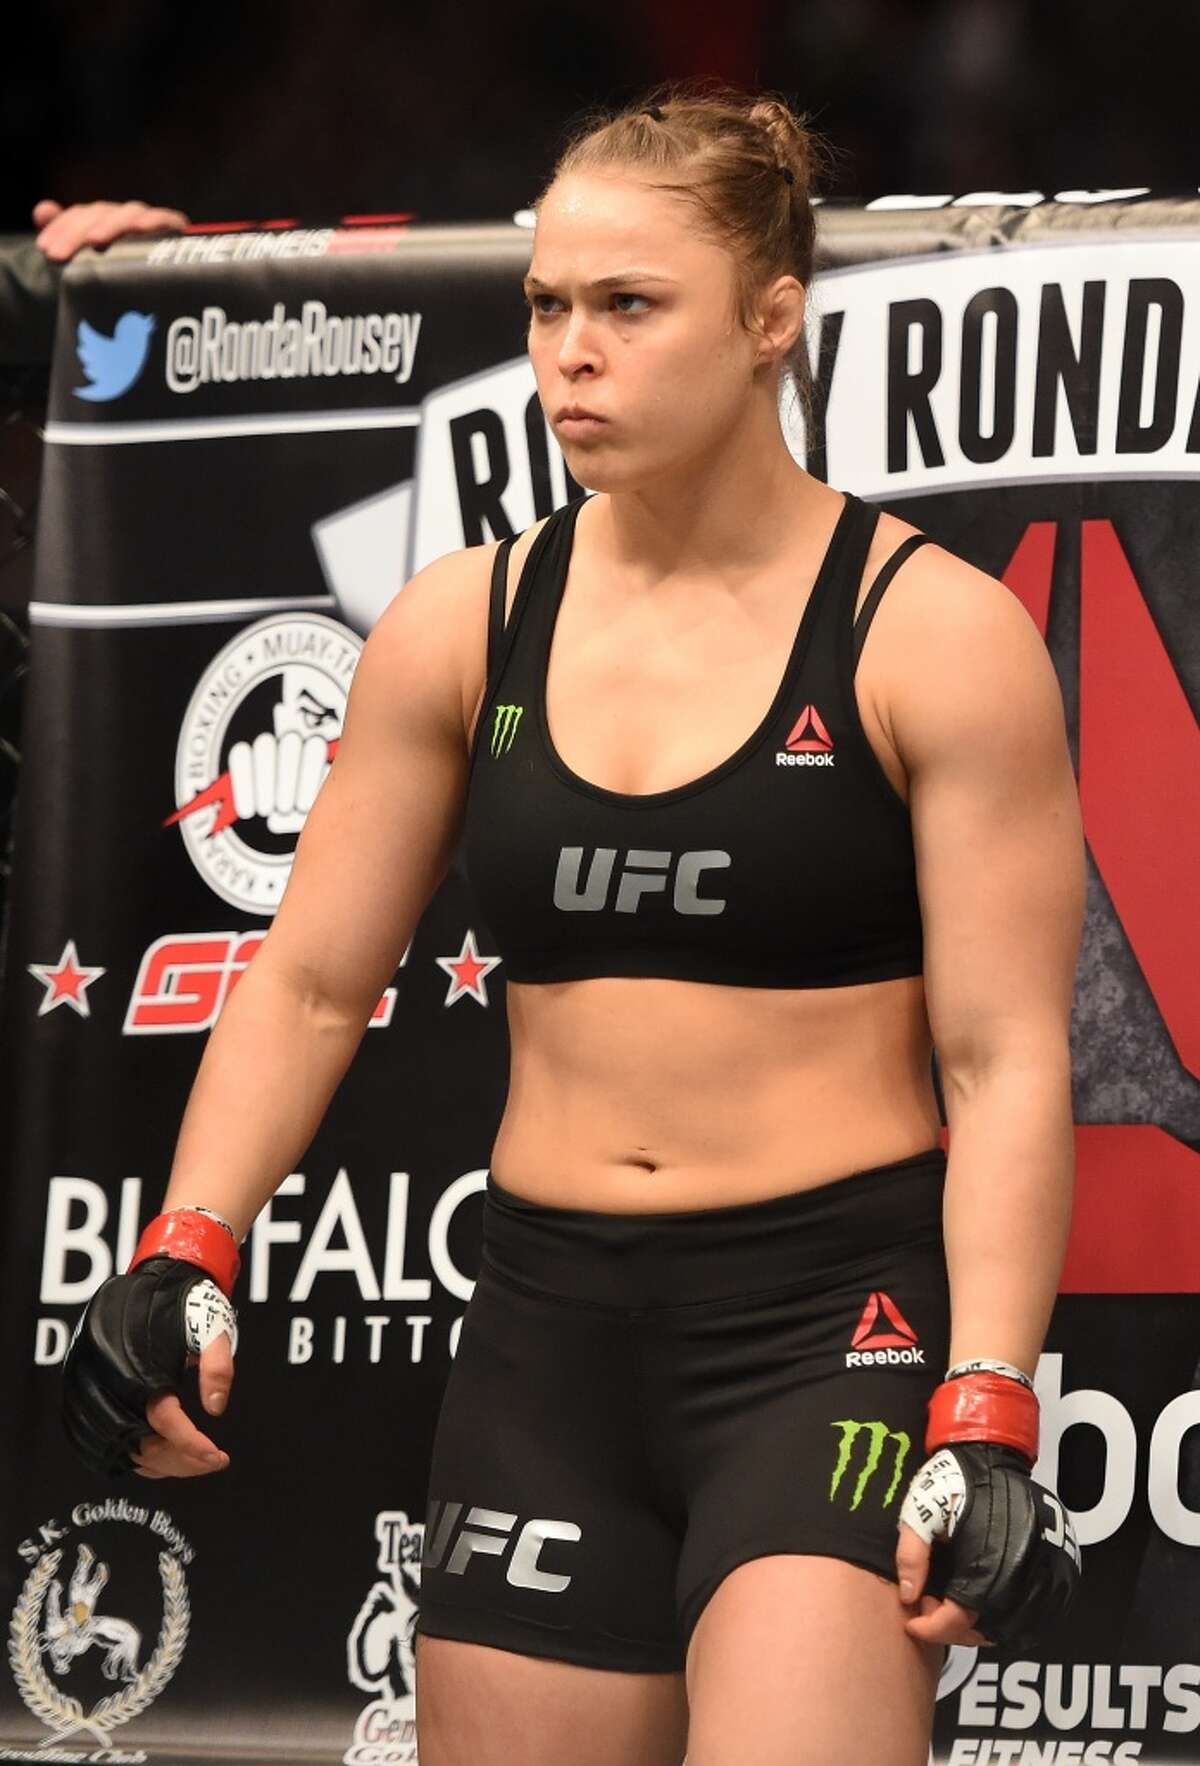 Ufc Champ Ronda Rousey Got Hit In The Face By Opponent During Weigh In She’s Not Happy About It